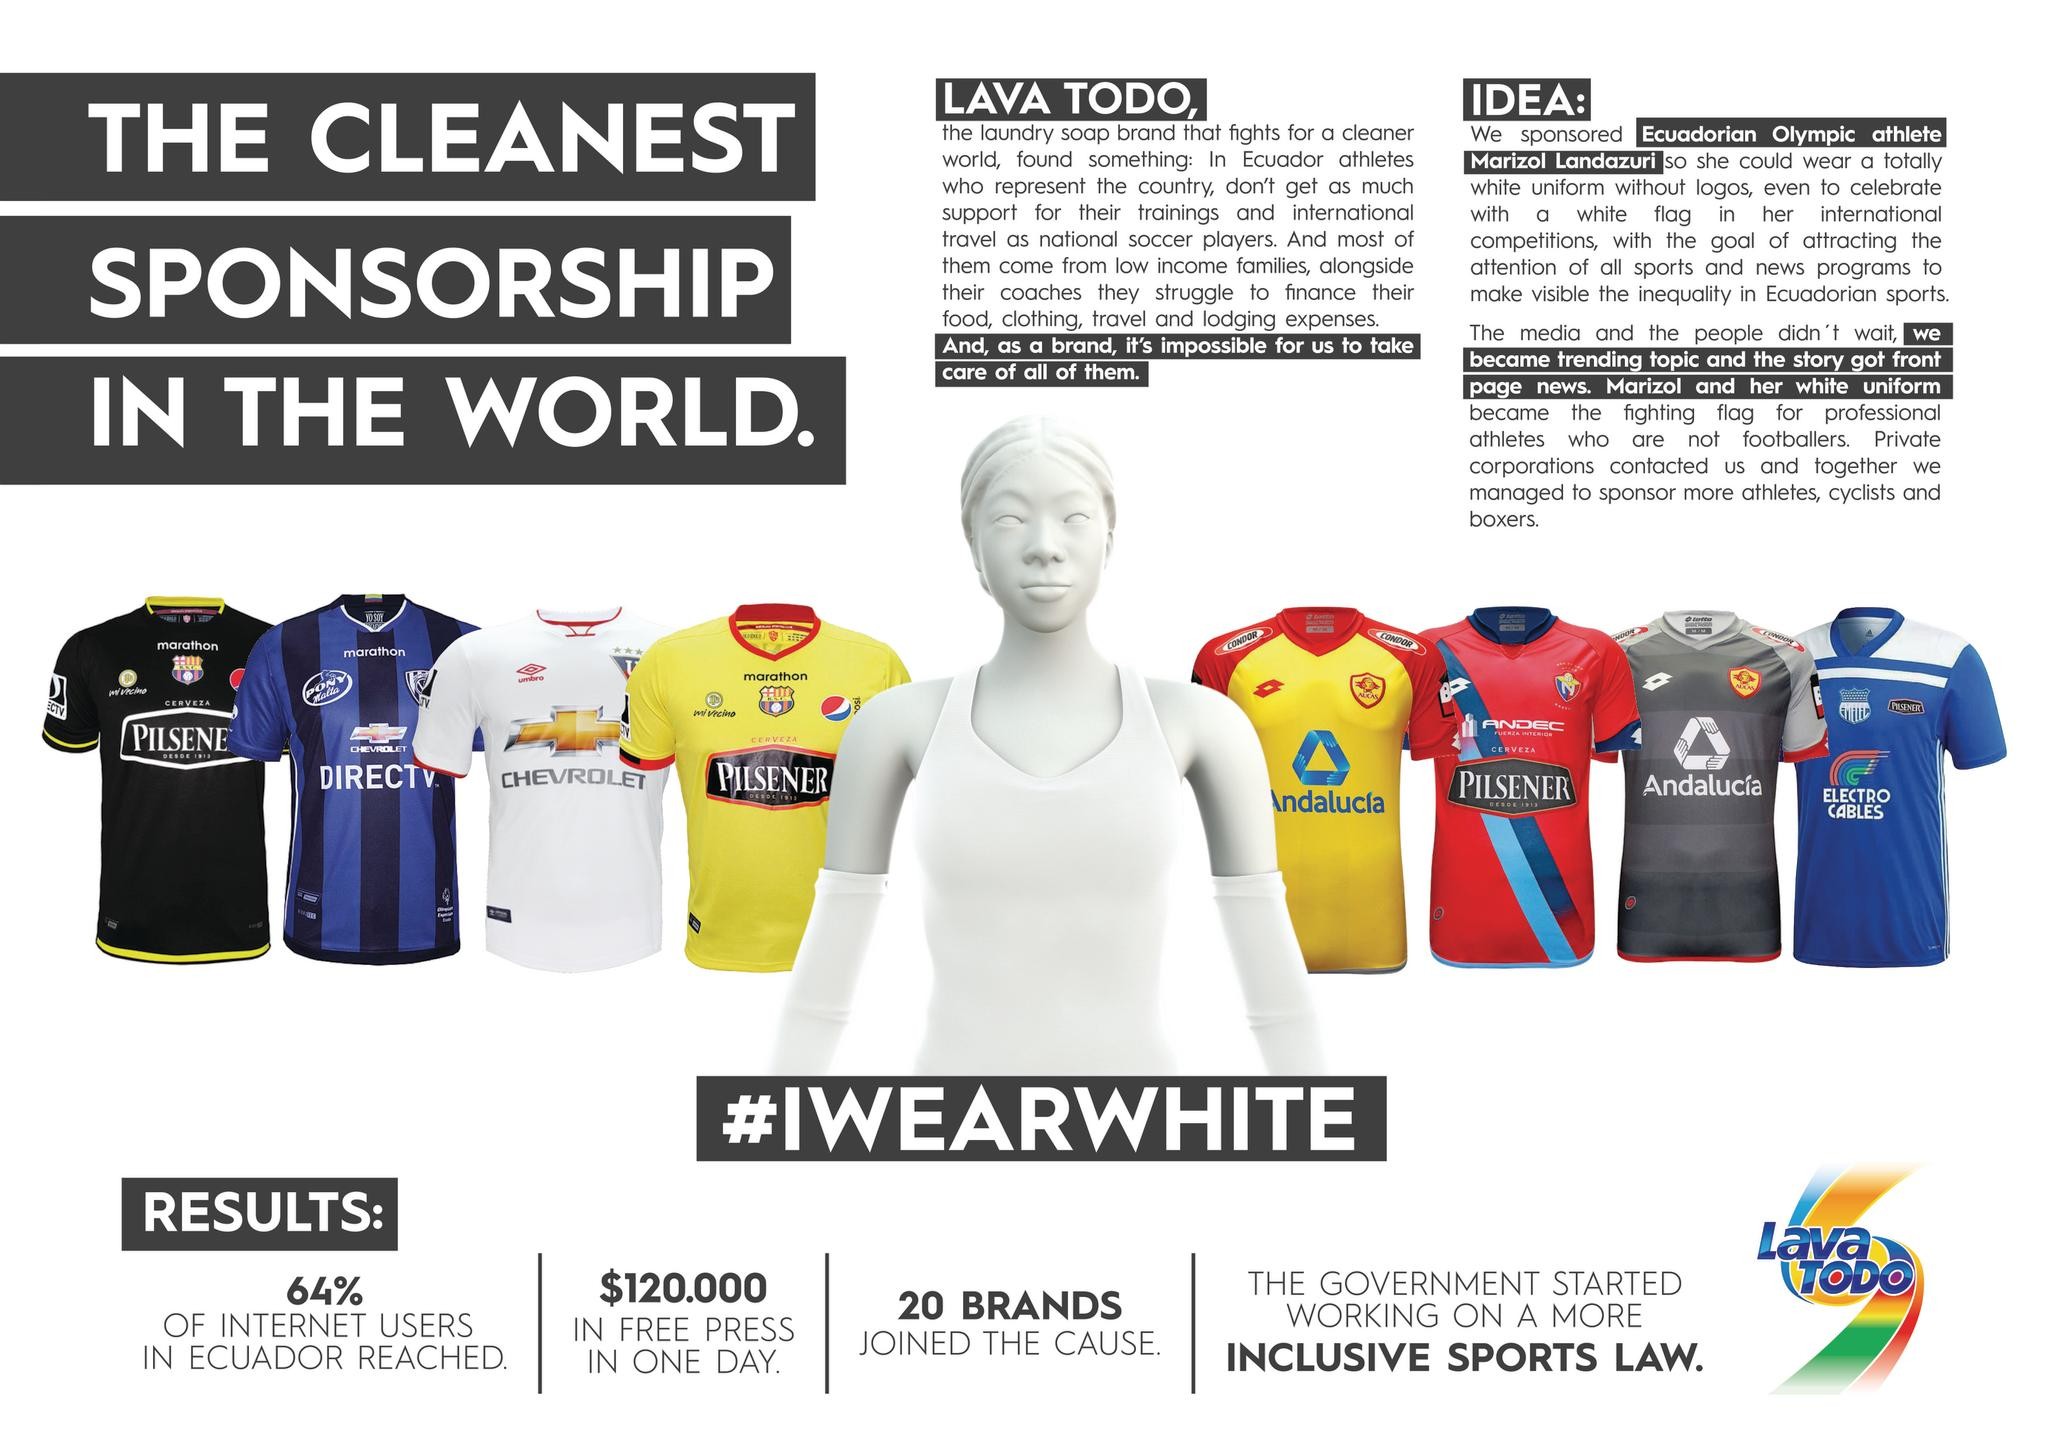 The Cleanest Sponsorship in the world